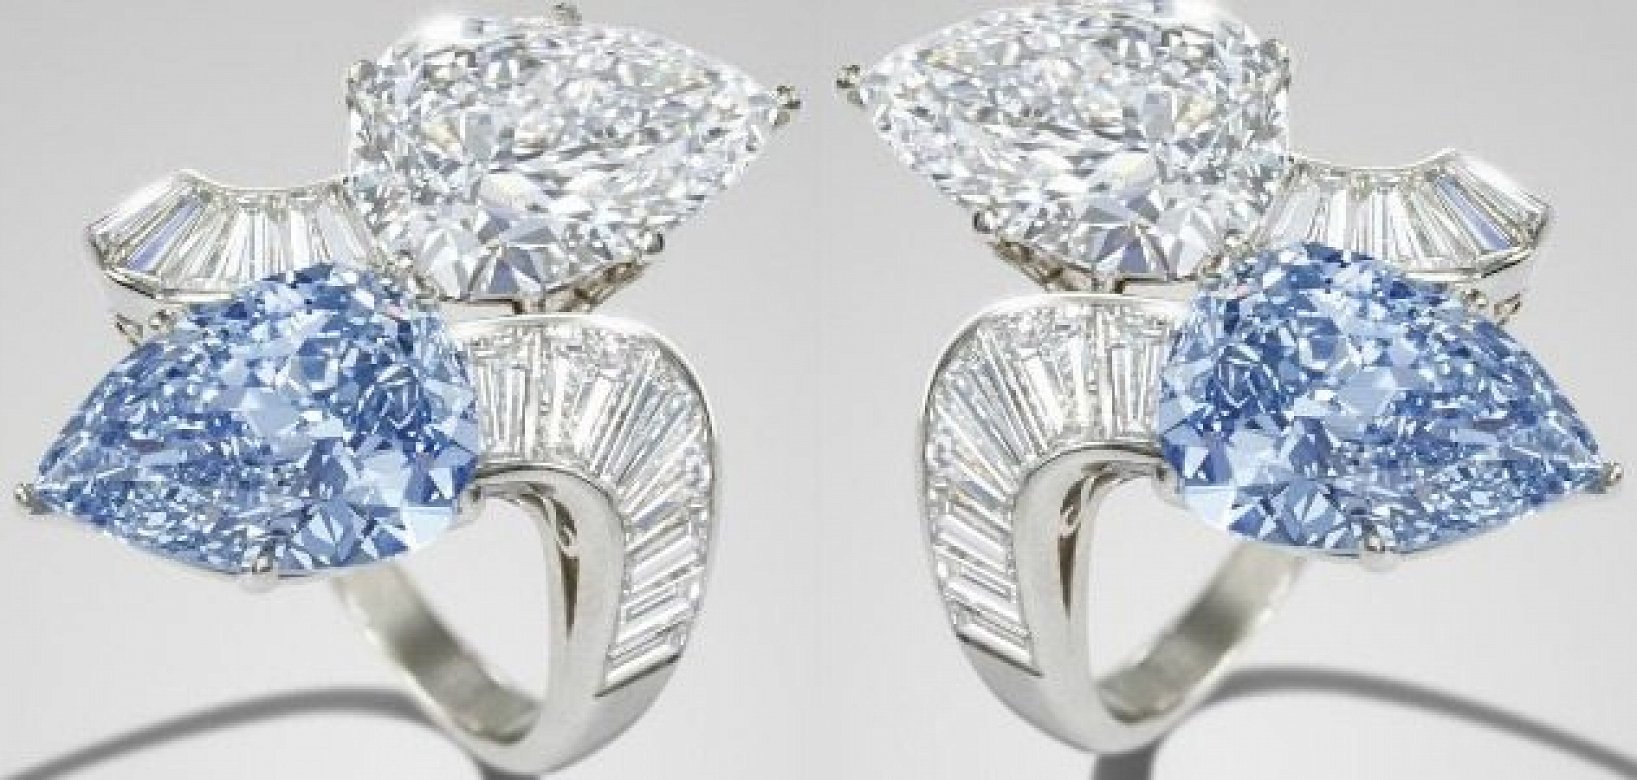 TOP 10 Most Expensive Engagement Rings in the World 2021 | GS Diamonds